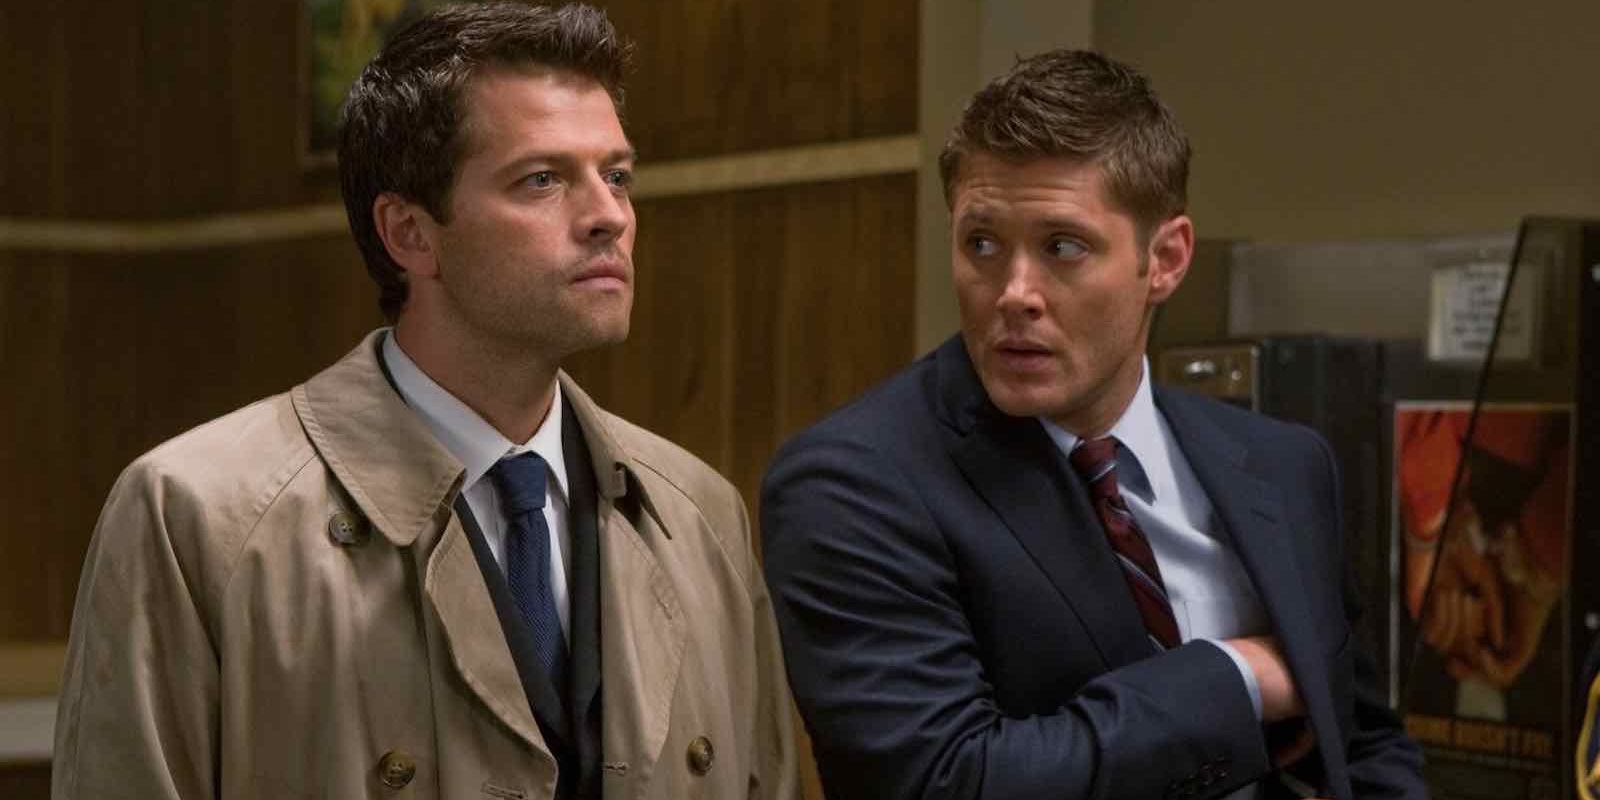 Castiel and Dean in Supernatural wearing suits